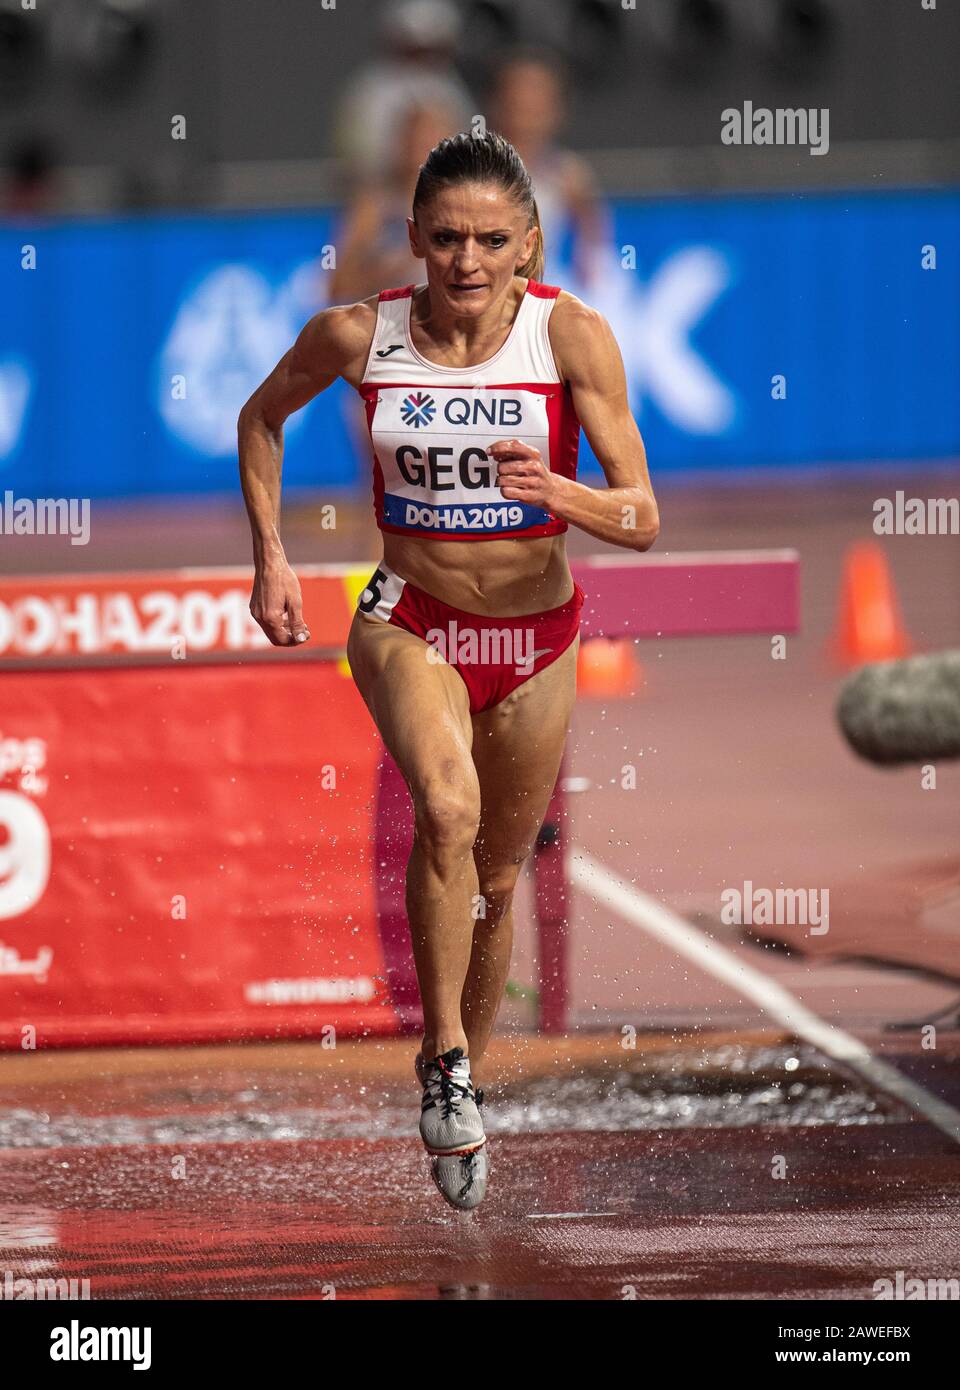 DOHA - QATAR - SEP 27: Luiza Gega (ALB) competing in the women’s 3000m steeplechase heats during day one of 17th IAAF World Athletics Championships Do Stock Photo